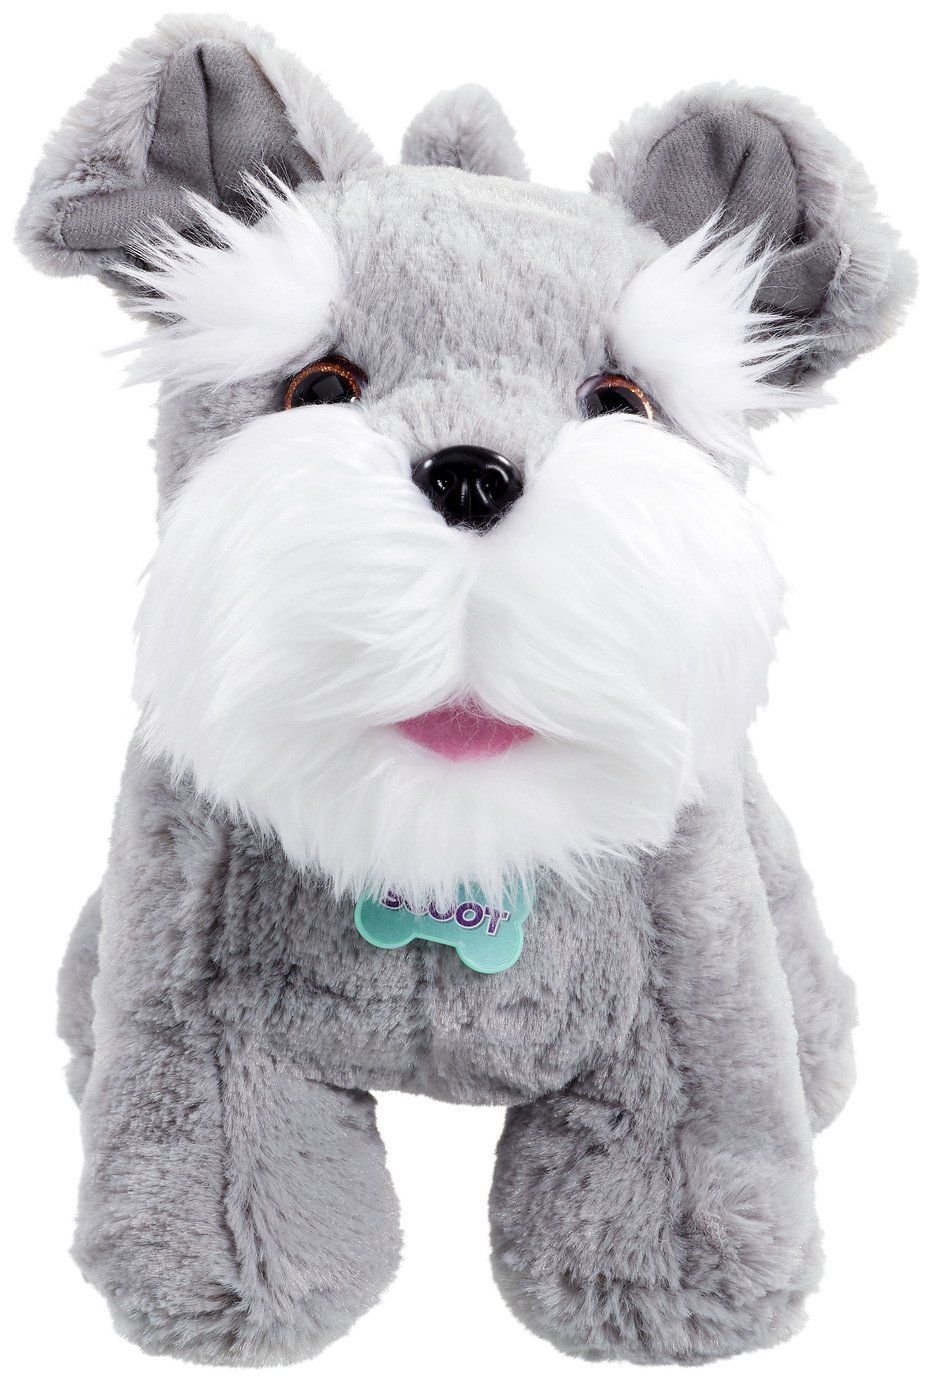 AniMagic Scoot the Puppy Soft Toy